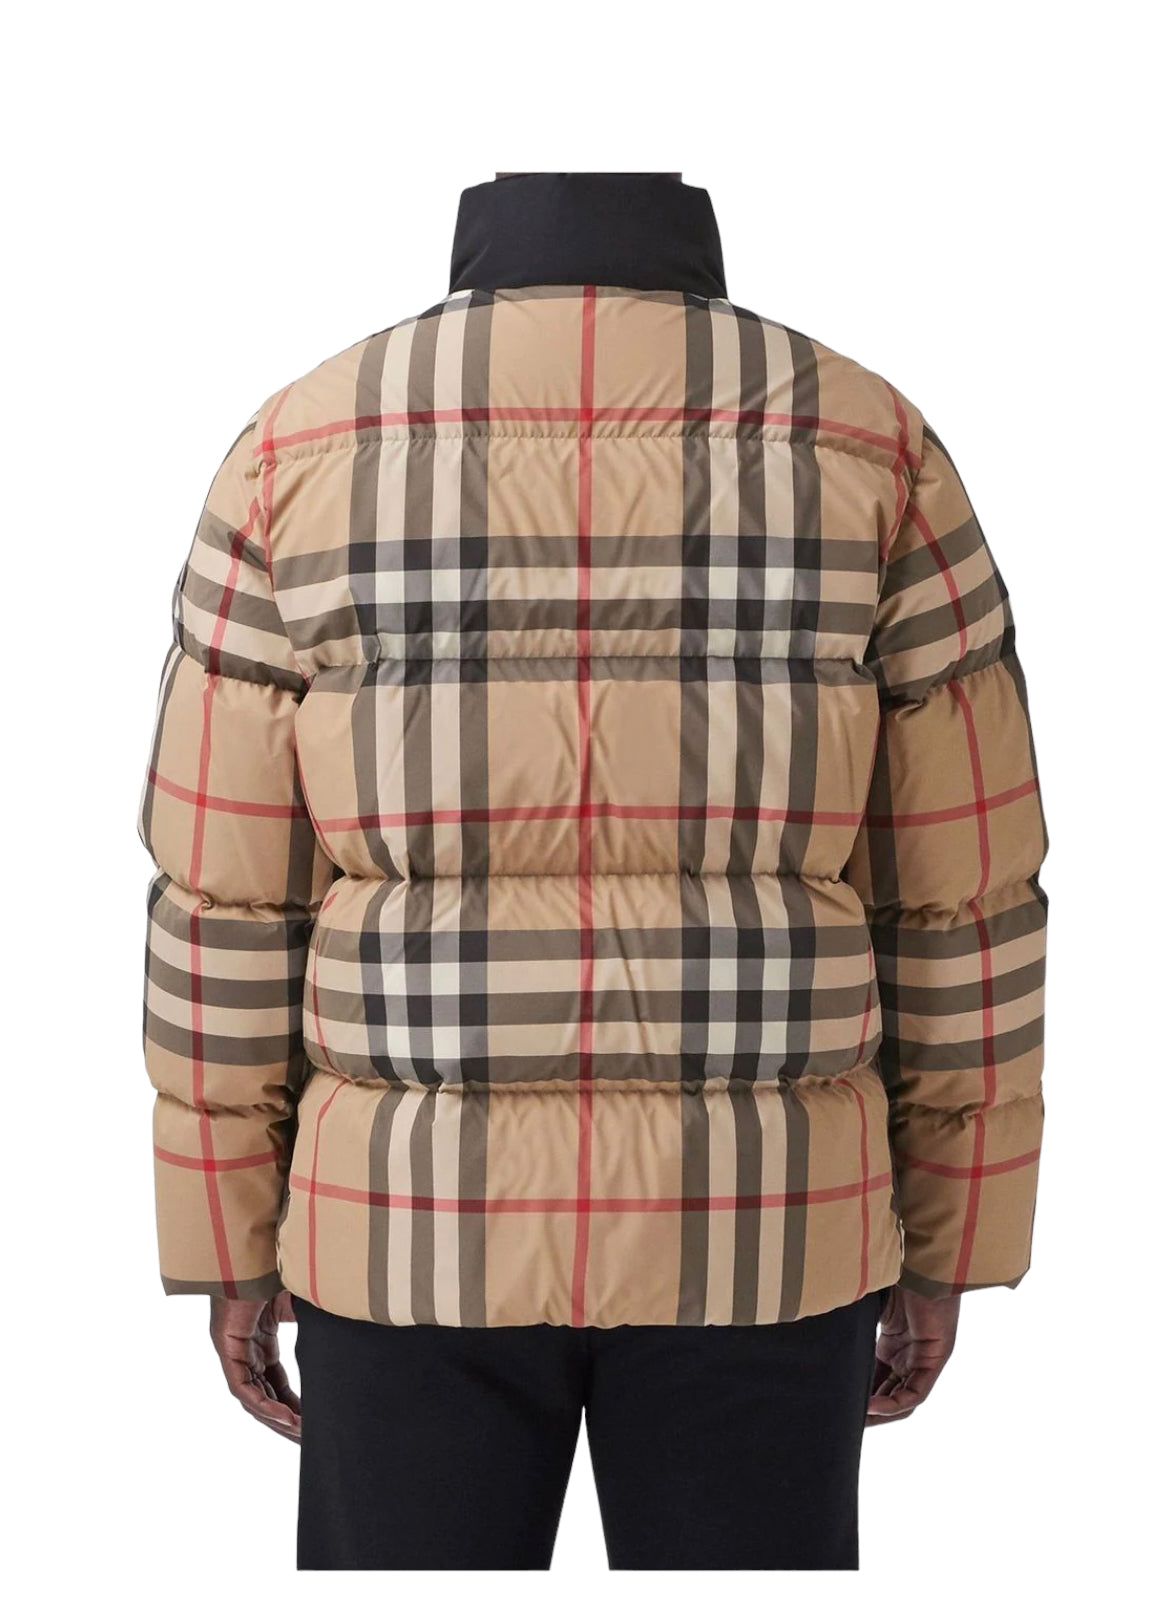 BURBERRY KILHAM CHECK NYLON PUFFER JACKET - ARCHIVE BEIGE – SGN CLOTHING